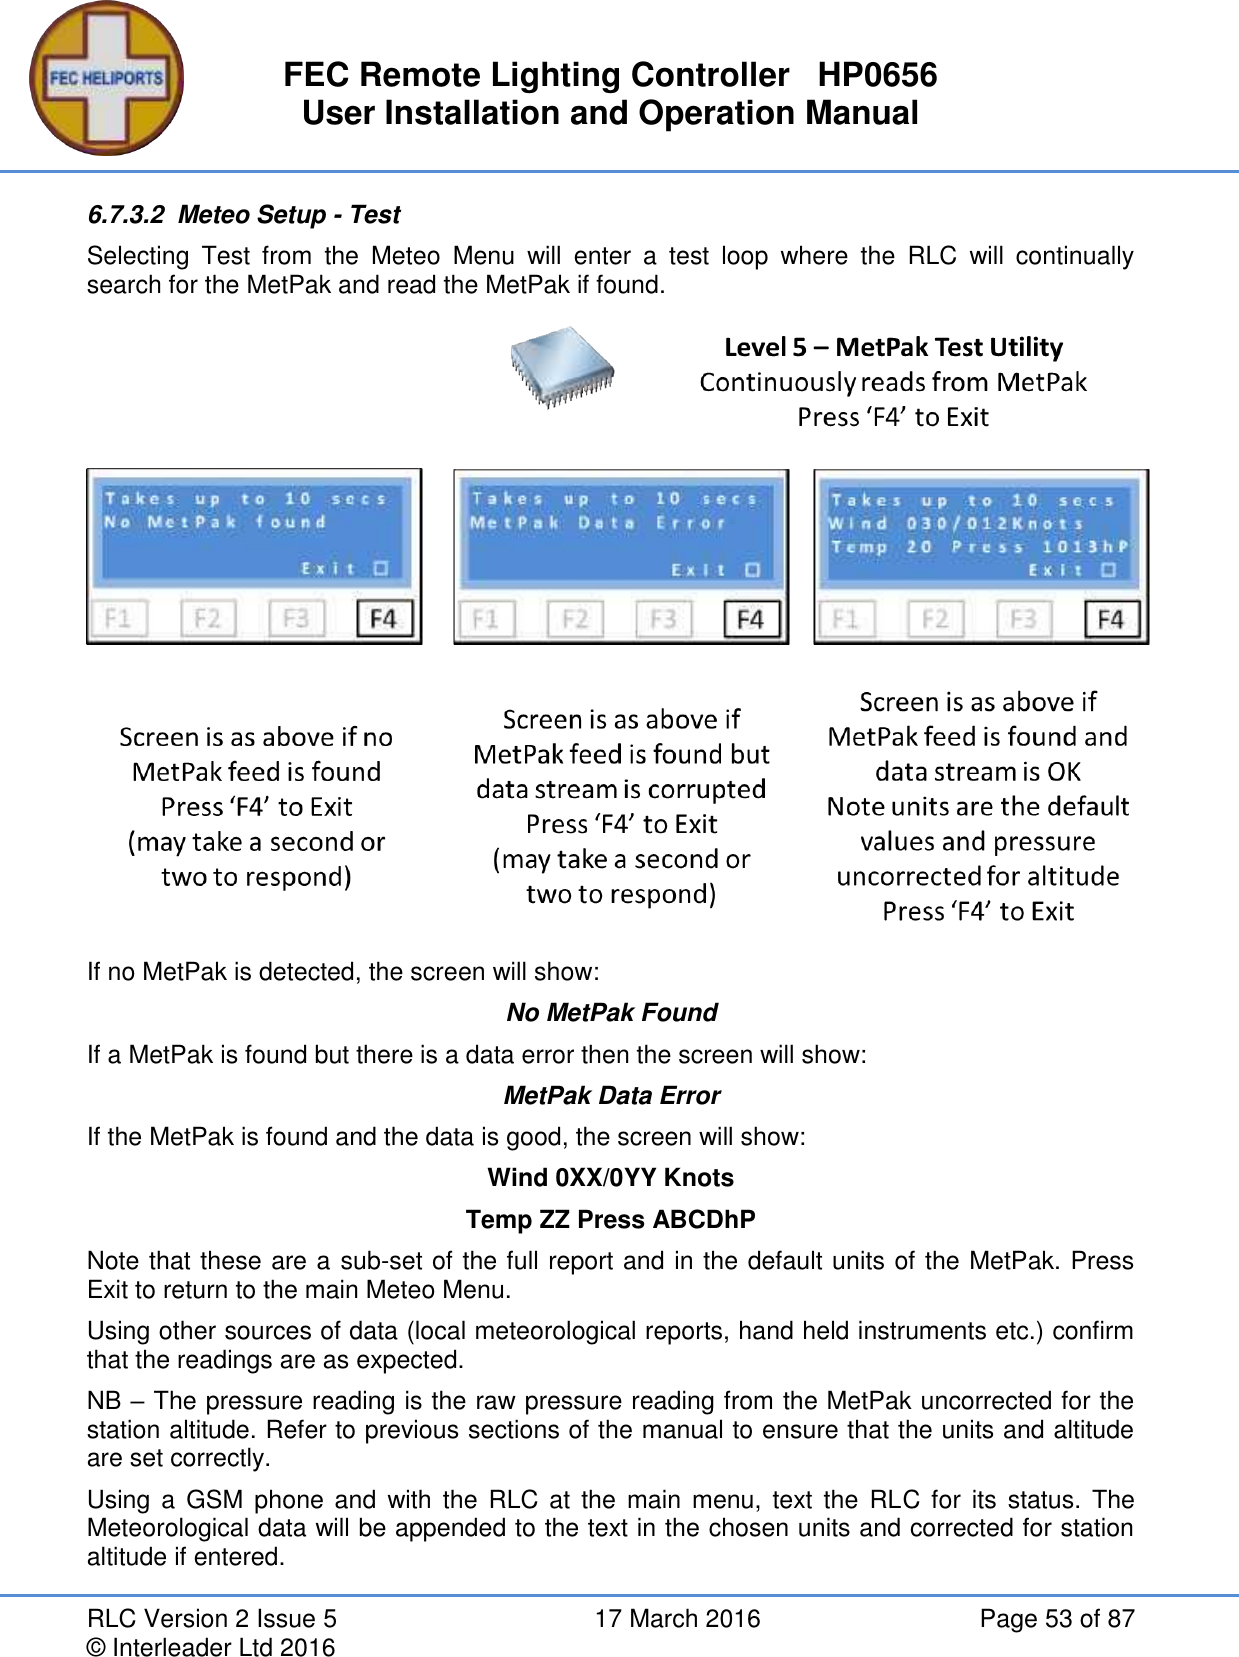 FEC Remote Lighting Controller   HP0656 User Installation and Operation Manual RLC Version 2 Issue 5  17 March 2016  Page 53 of 87 © Interleader Ltd 2016 6.7.3.2  Meteo Setup - Test Selecting  Test  from  the  Meteo  Menu  will  enter  a  test  loop  where  the  RLC  will  continually search for the MetPak and read the MetPak if found.  If no MetPak is detected, the screen will show: No MetPak Found If a MetPak is found but there is a data error then the screen will show: MetPak Data Error If the MetPak is found and the data is good, the screen will show: Wind 0XX/0YY Knots Temp ZZ Press ABCDhP Note that these are a sub-set of the full report and in the default units of the MetPak. Press Exit to return to the main Meteo Menu. Using other sources of data (local meteorological reports, hand held instruments etc.) confirm that the readings are as expected. NB – The pressure reading is the raw pressure reading from the MetPak uncorrected for the station altitude. Refer to previous sections of the manual to ensure that the units and altitude are set correctly. Using a  GSM  phone and  with  the  RLC  at  the main menu,  text  the  RLC  for  its  status.  The Meteorological data will be appended to the text in the chosen units and corrected for station altitude if entered.  